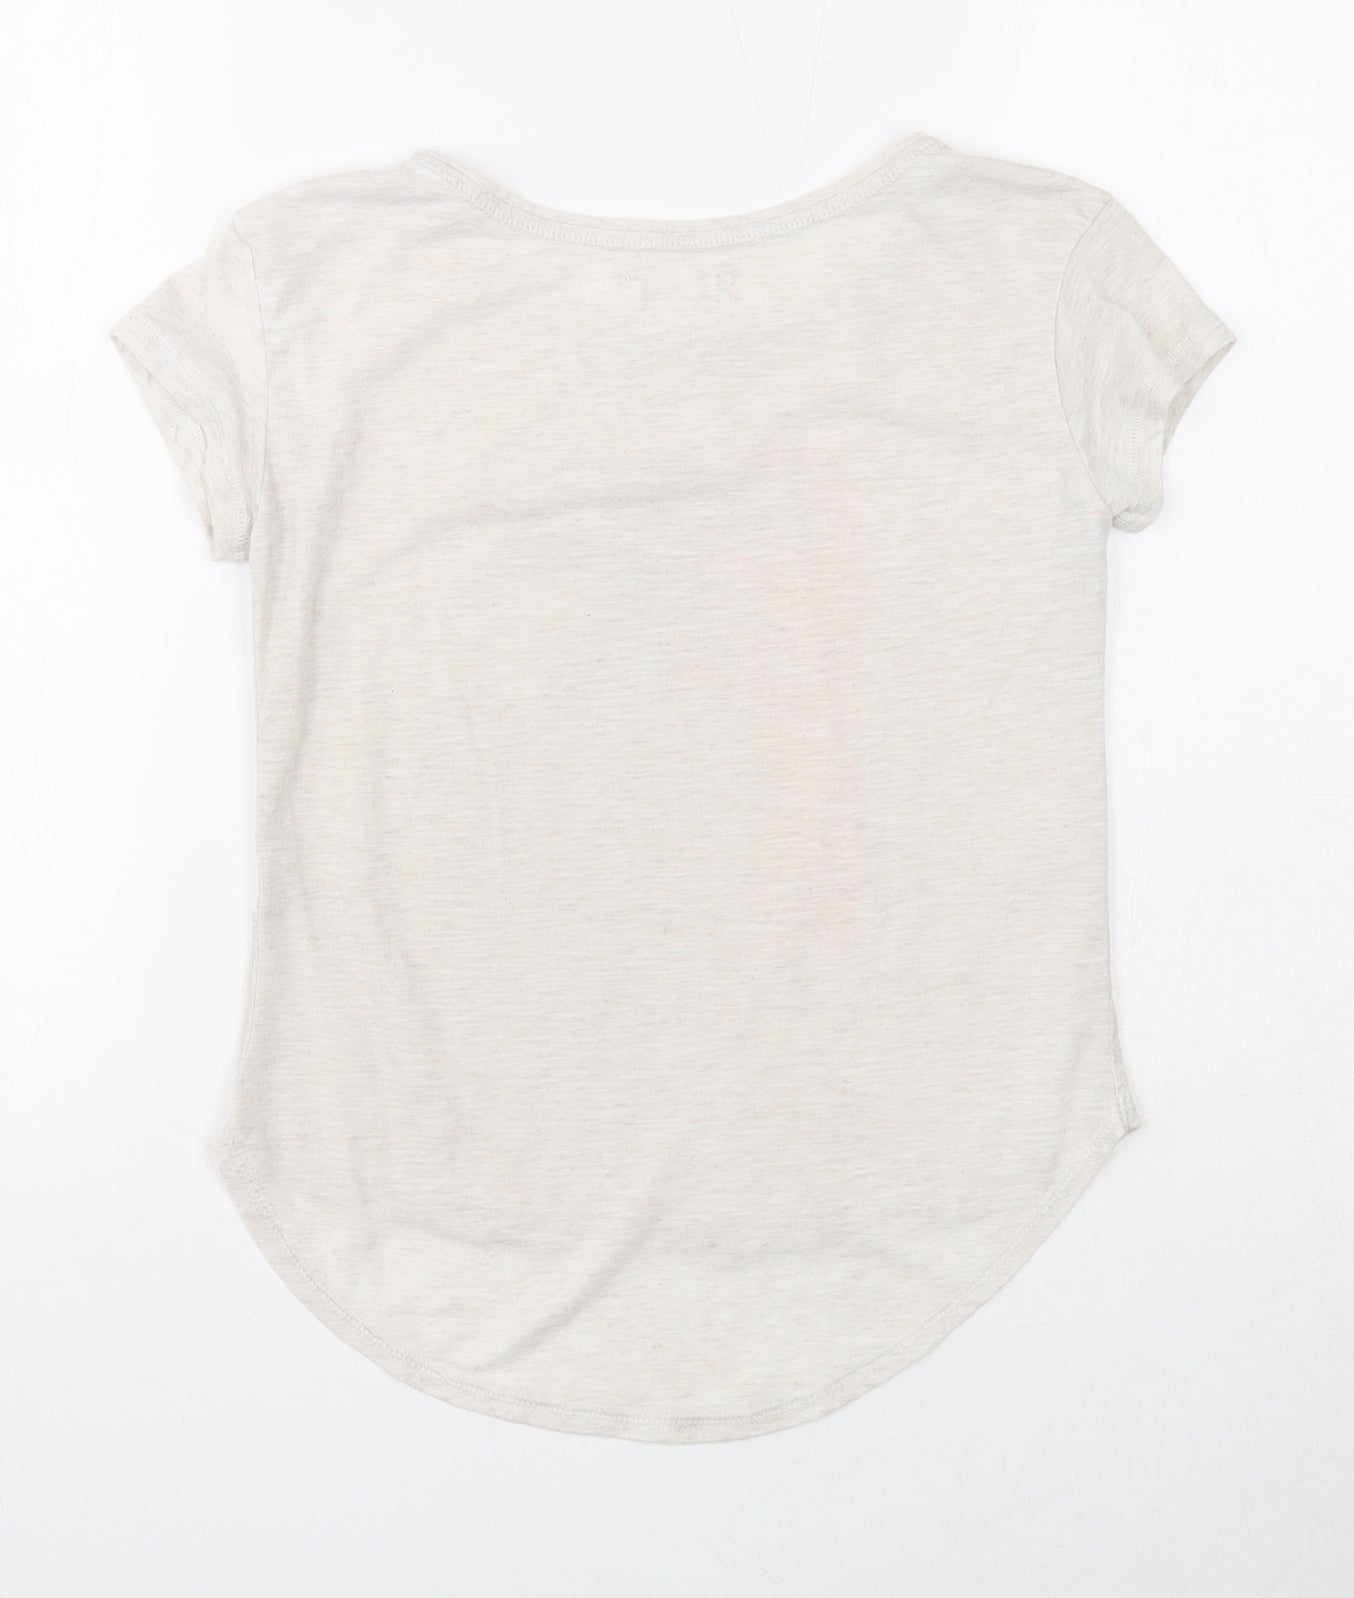 H&M Girls Ivory Cotton Basic T-Shirt Size 9-10 Years Round Neck Pullover - Sweet Tropic Breeze